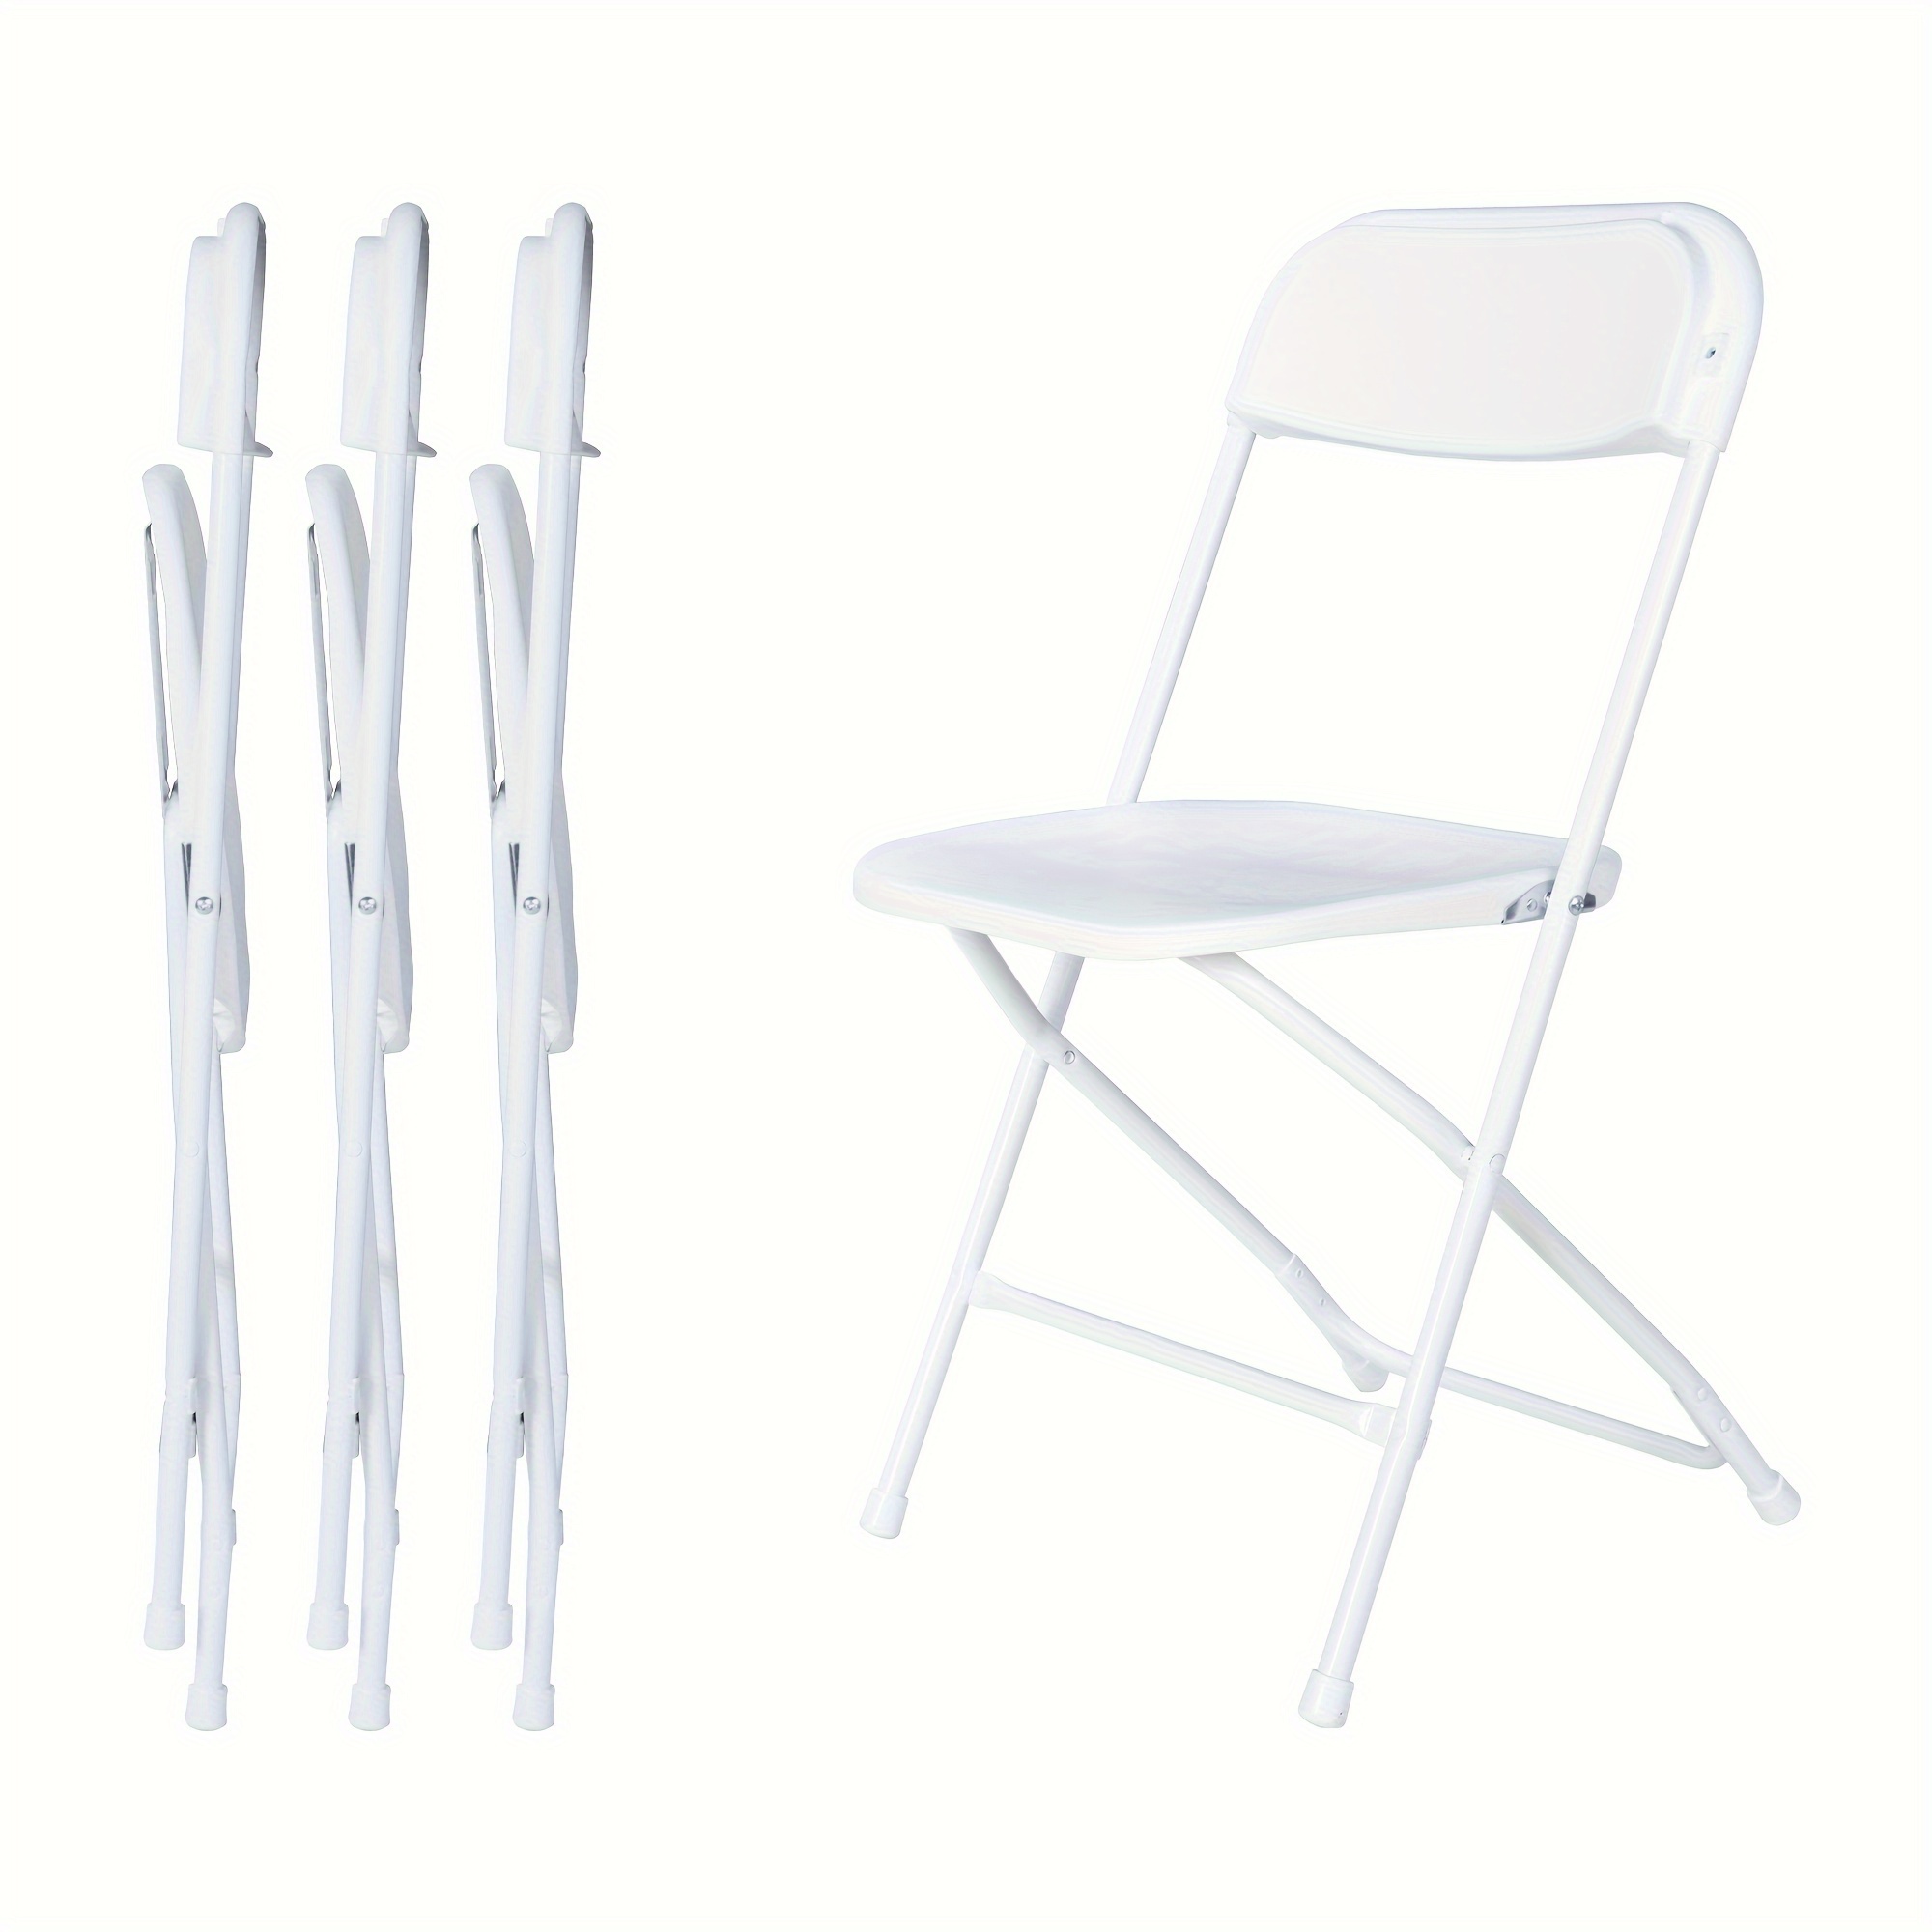 

Plastic Folding Outdoor Chairs With 330lbs Weight Capacity, Comfortable Event Chair-light Weight Folding Chairs For Indoor Outdoor Dinning Party Wedding School Use (white, 4 Pack)